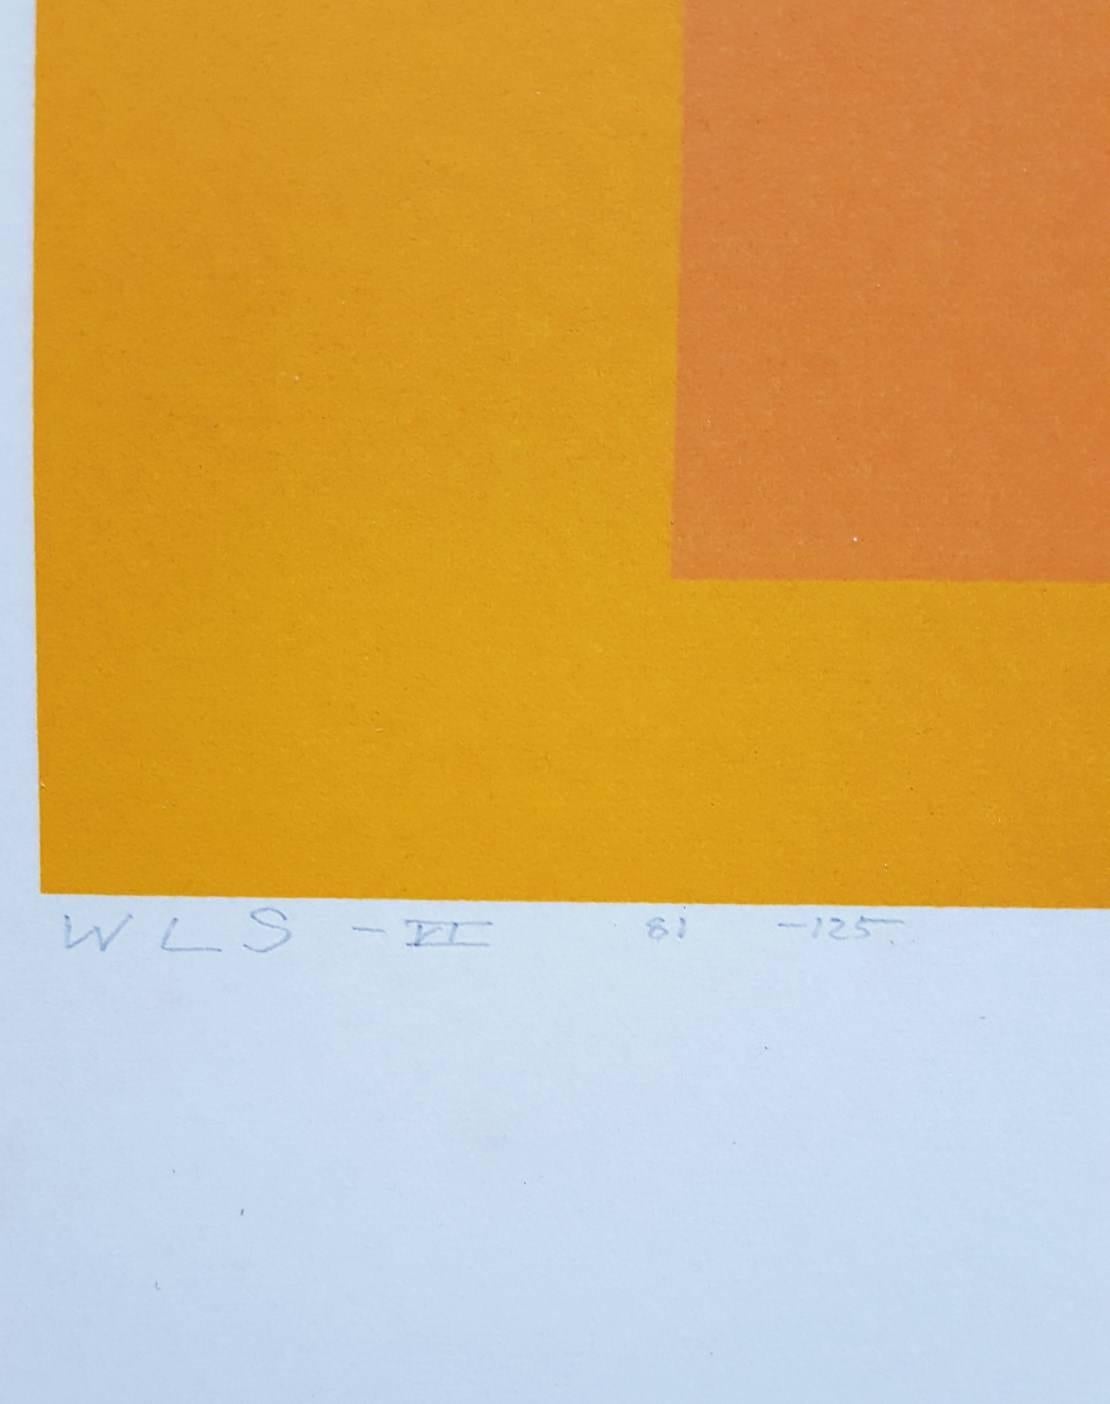 WLS VI (White Line Squares Series I) - Orange Abstract Print by Josef Albers